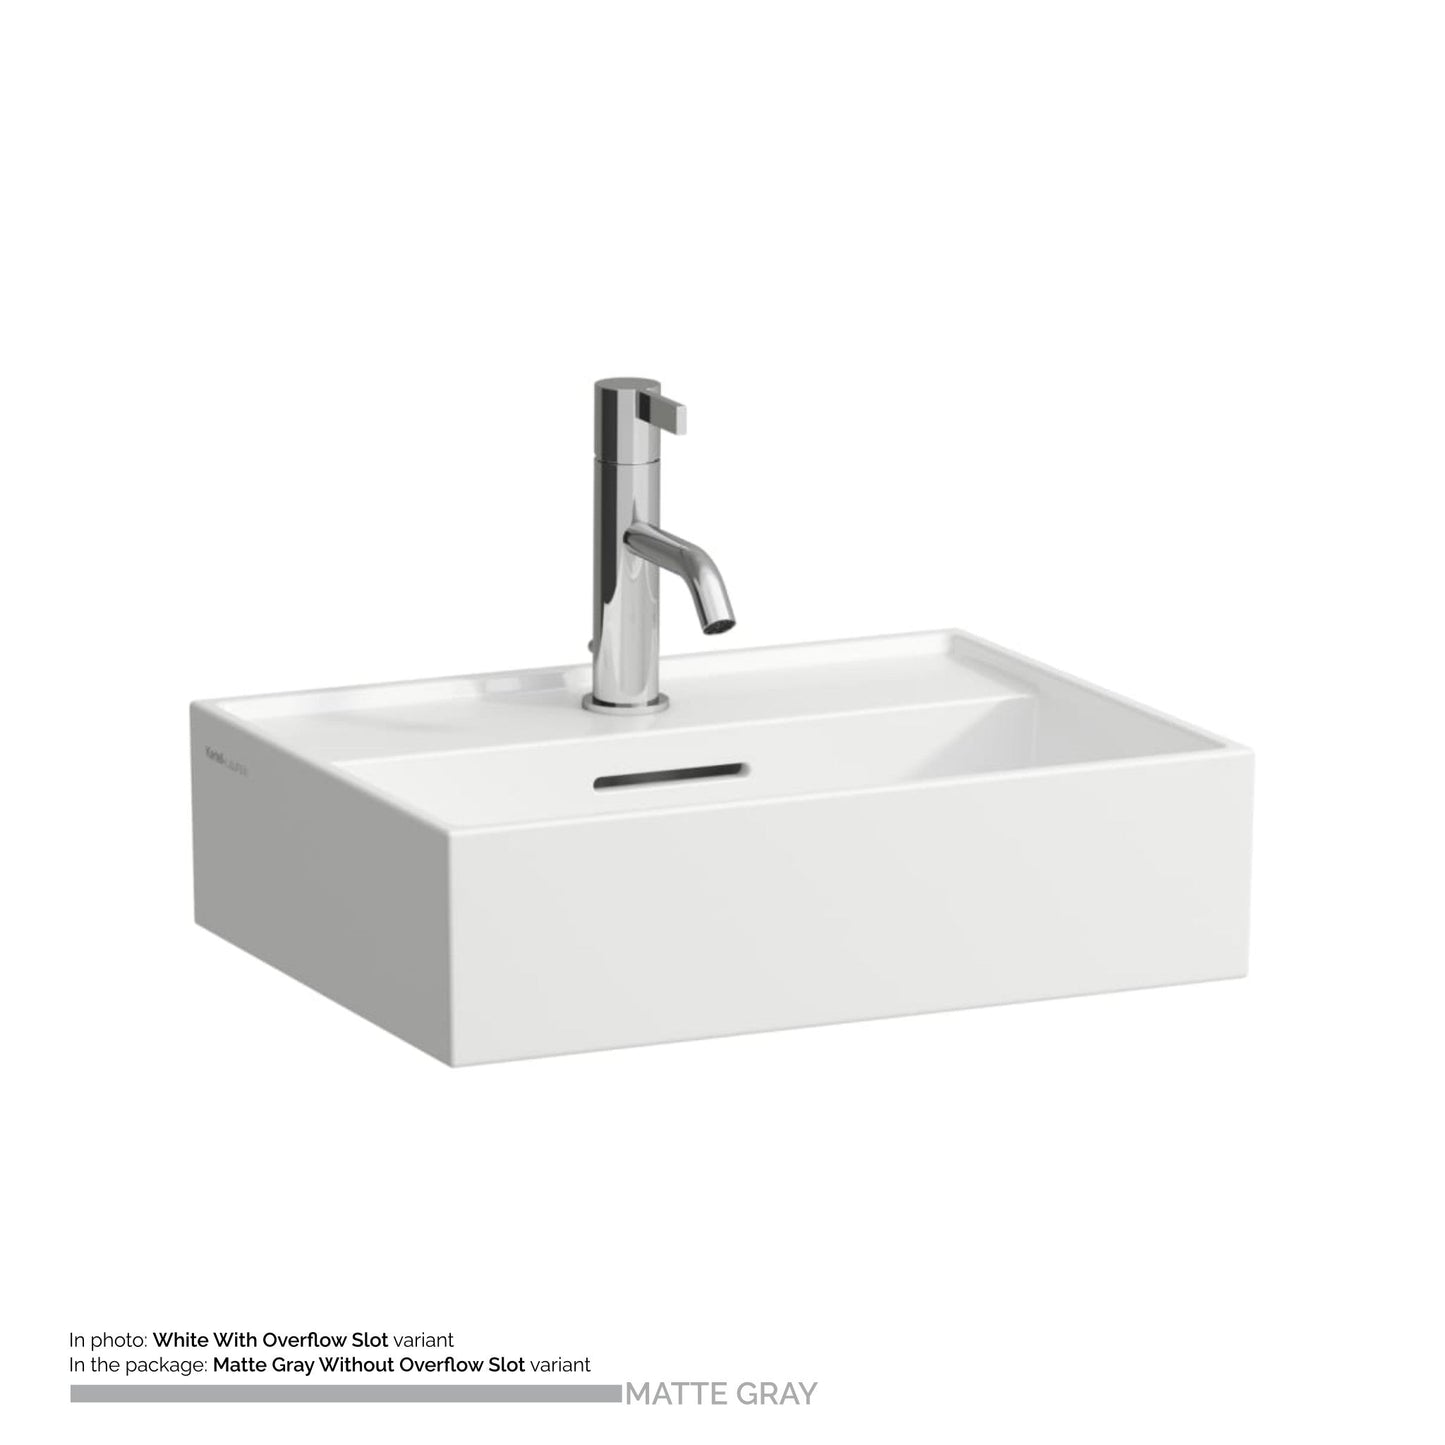 Laufen Kartell 18" x 13" Matte Gray Wall-Mounted Bathroom Sink With Faucet Hole